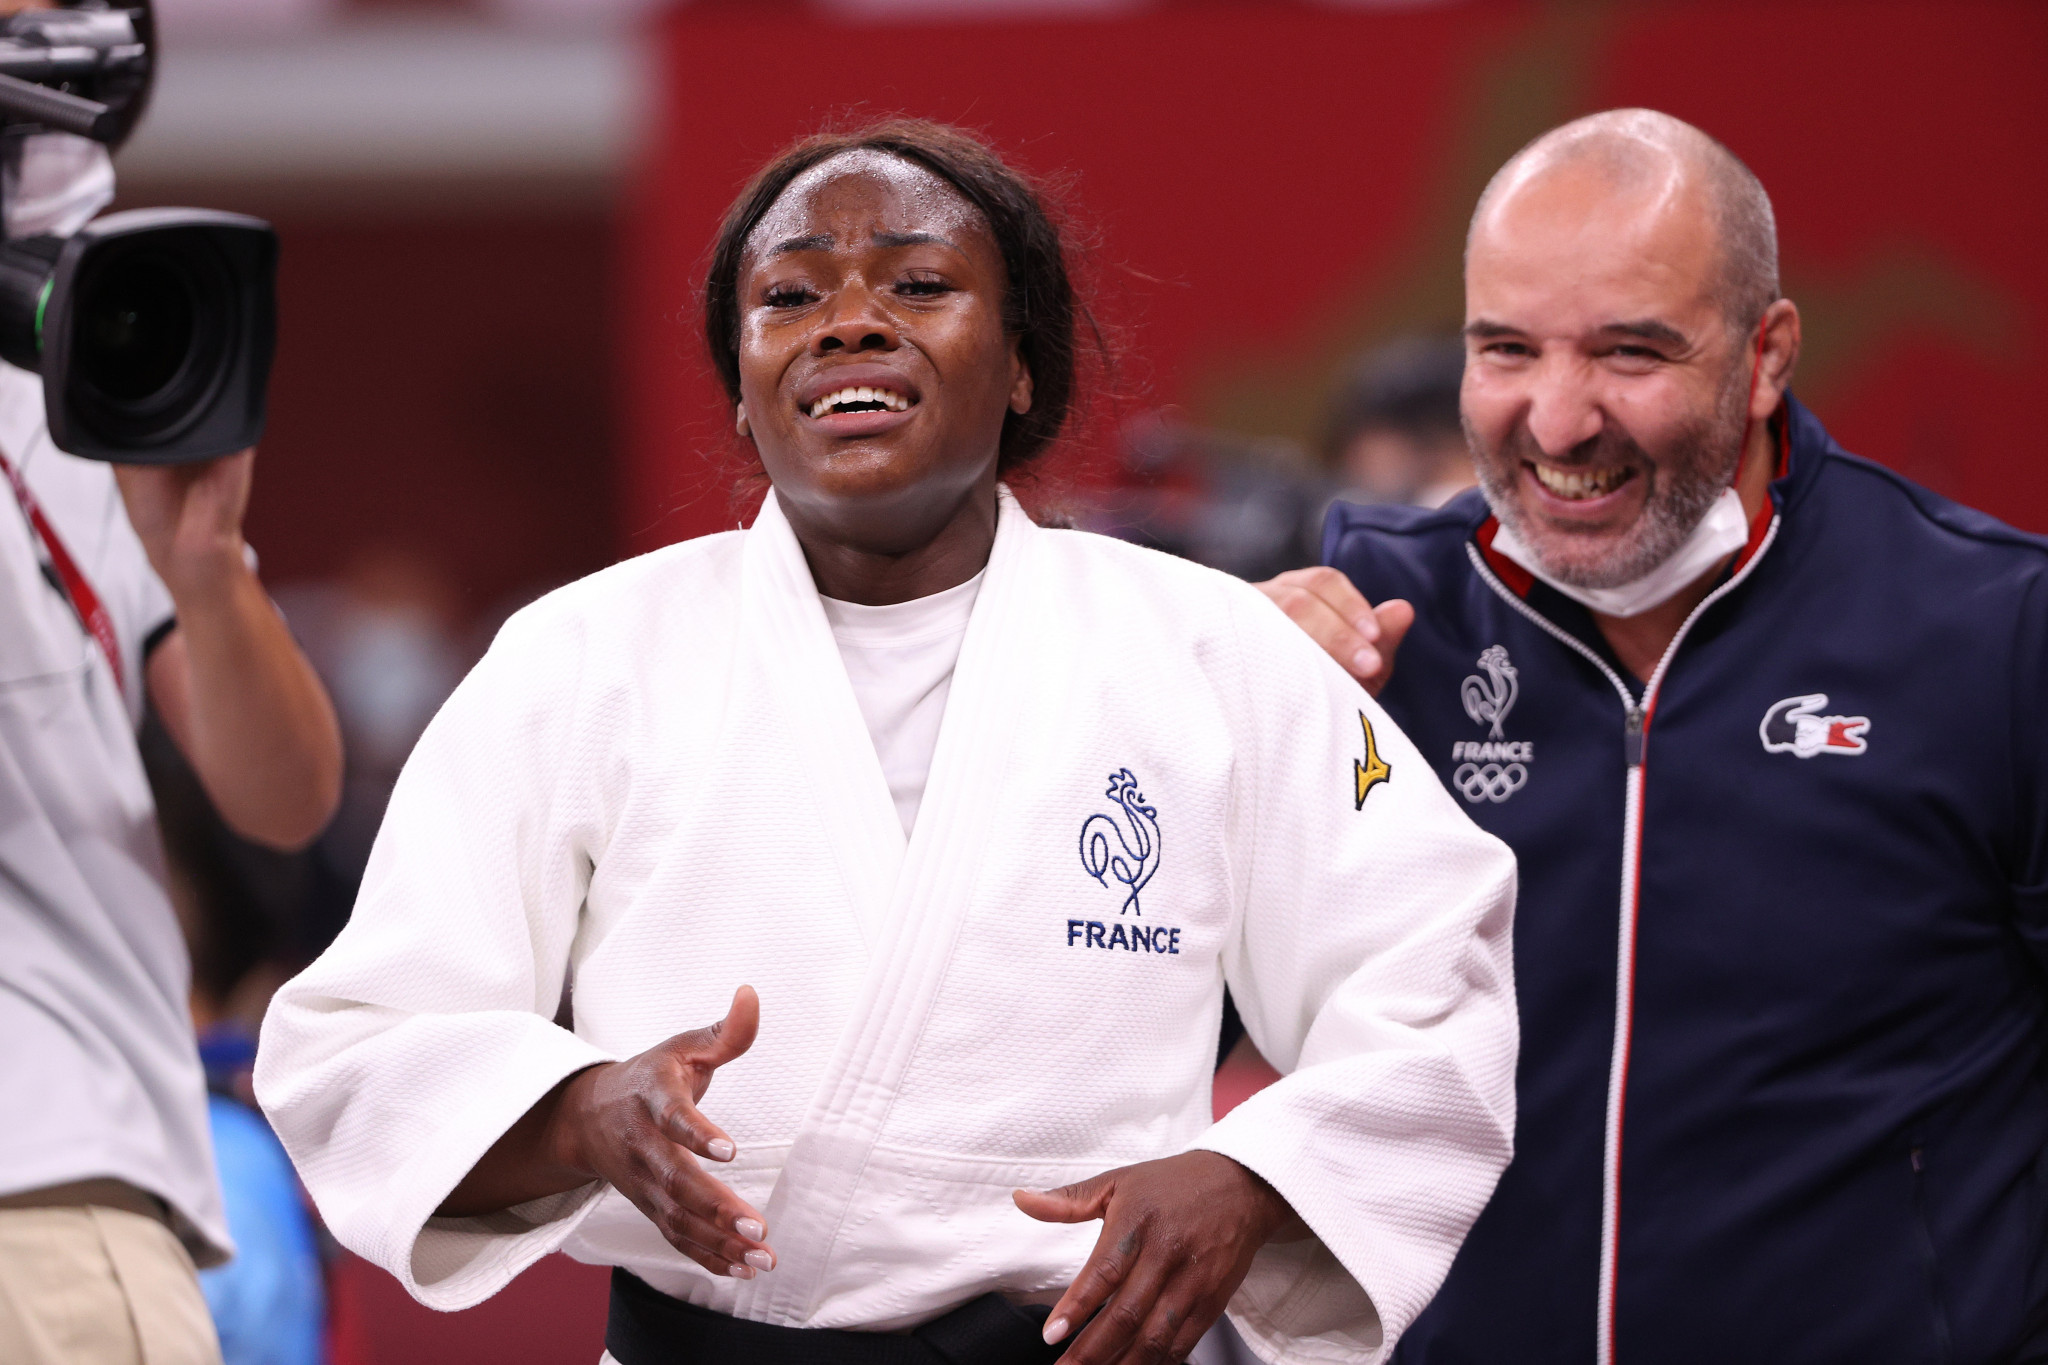 France aims for new judo talent in time for Paris 2024